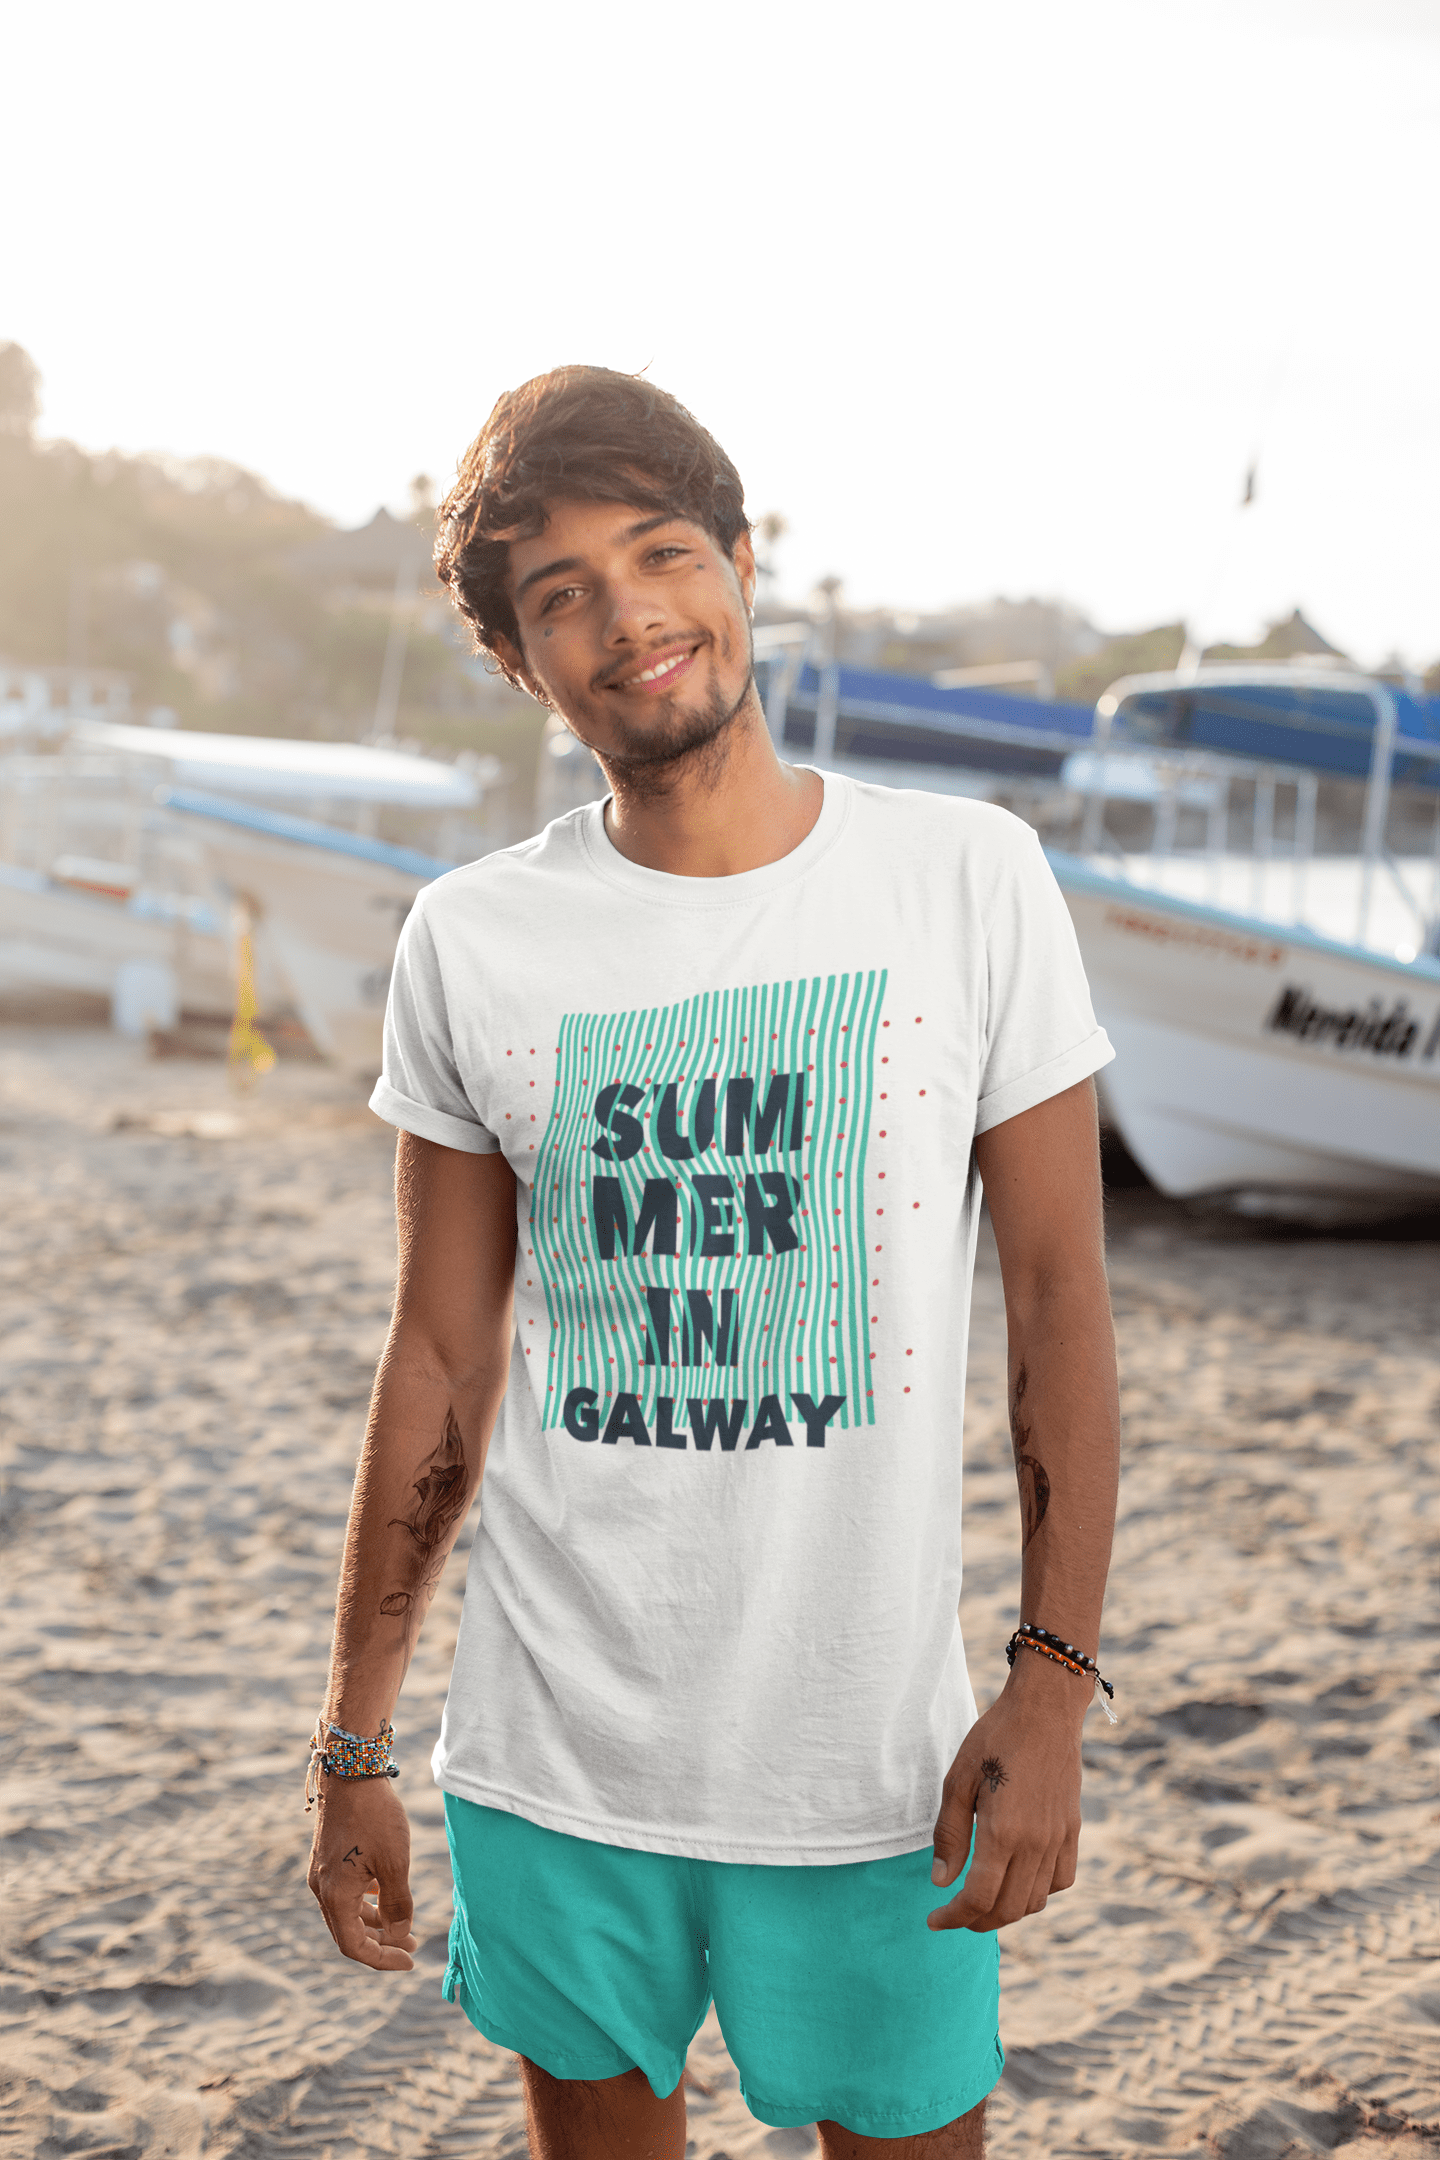 Ultrabasic - Homme Graphique Summer in Galway Blanc